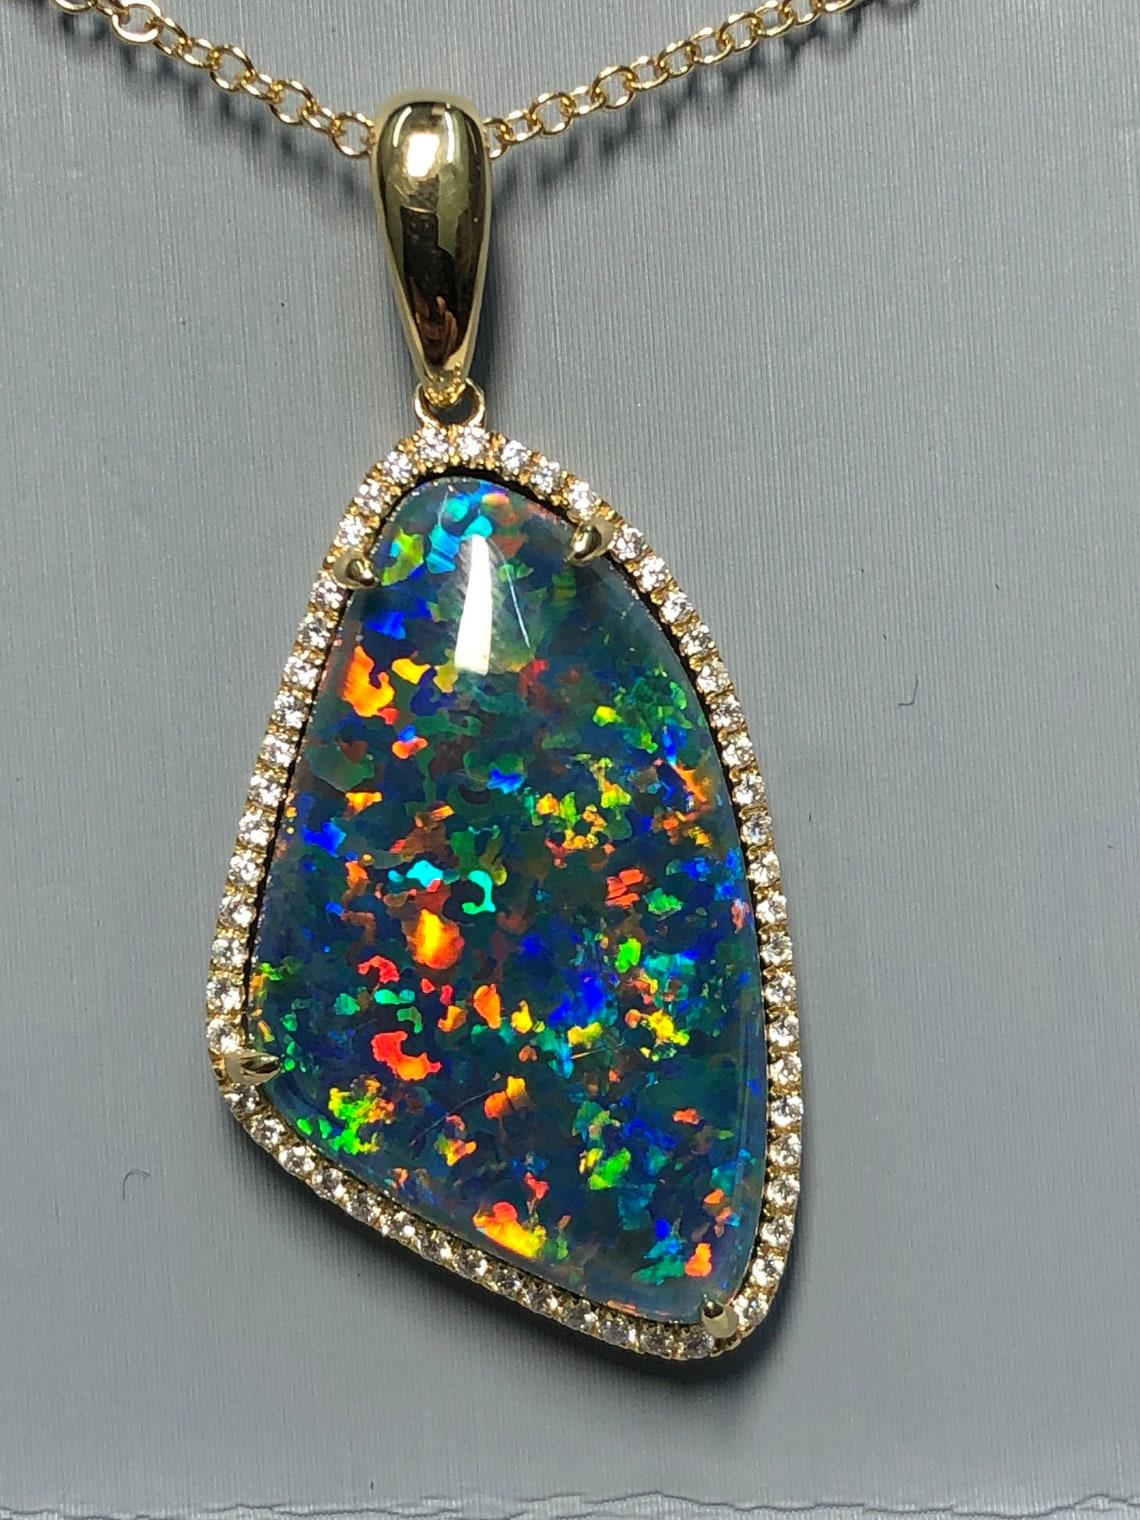 10.36 Carat Australian Opal Diamond Necklace  18 karat Yellow Gold . This shows off bright colors Blue Yellow Green Orange Red  which is a rare color as its so hard to find in them . The black opals found in Coober Pedy is considered some of the